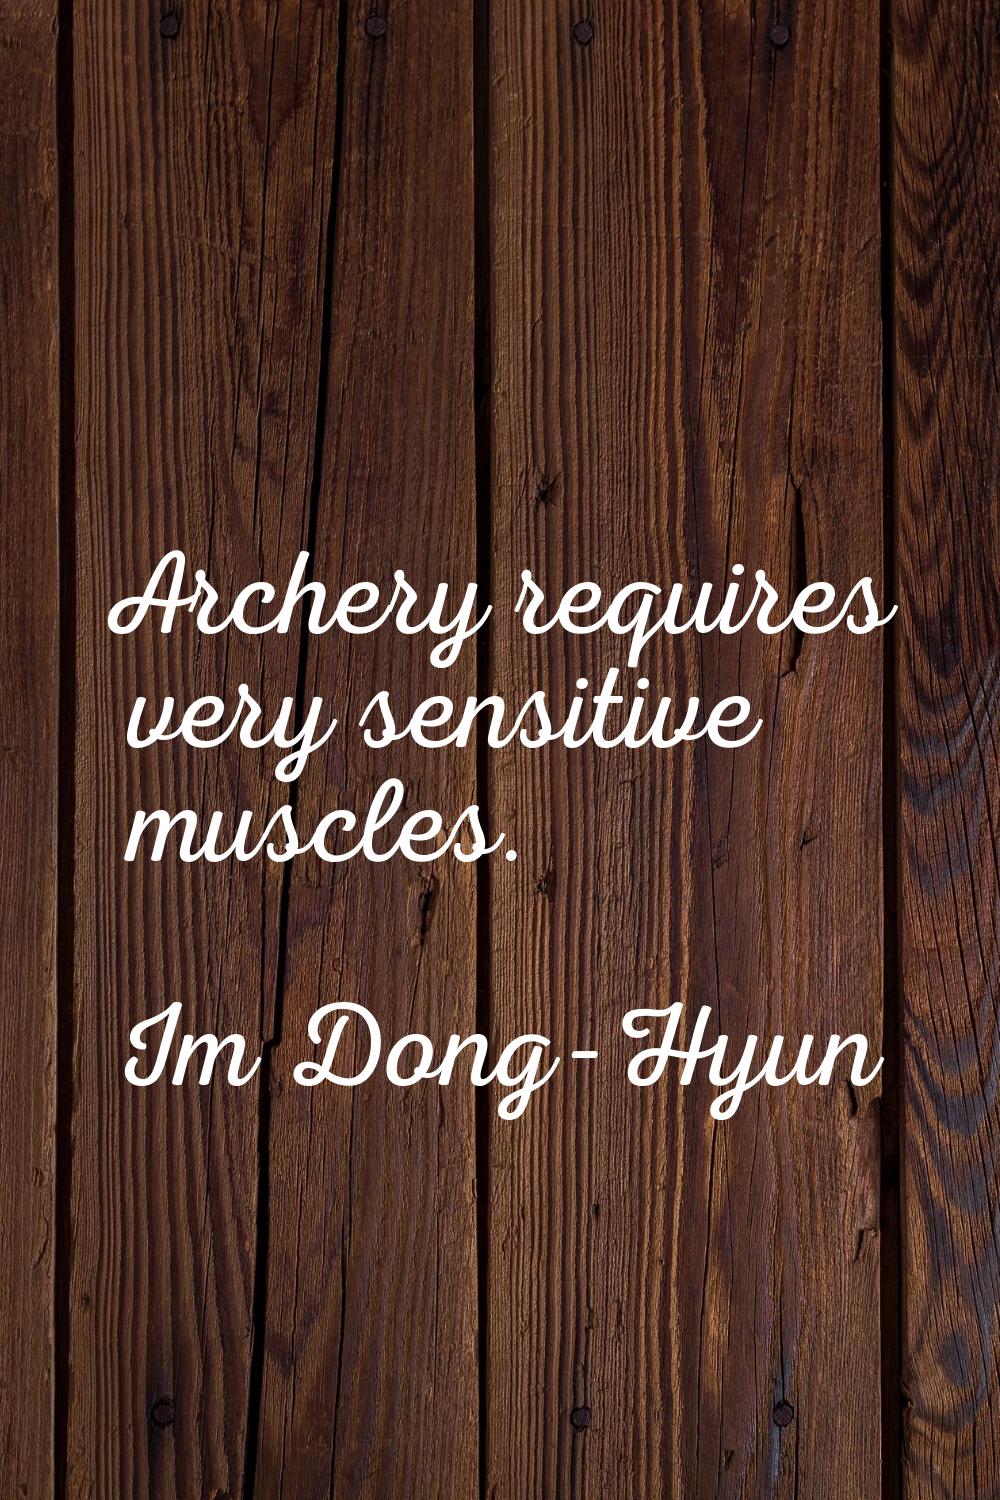 Archery requires very sensitive muscles.